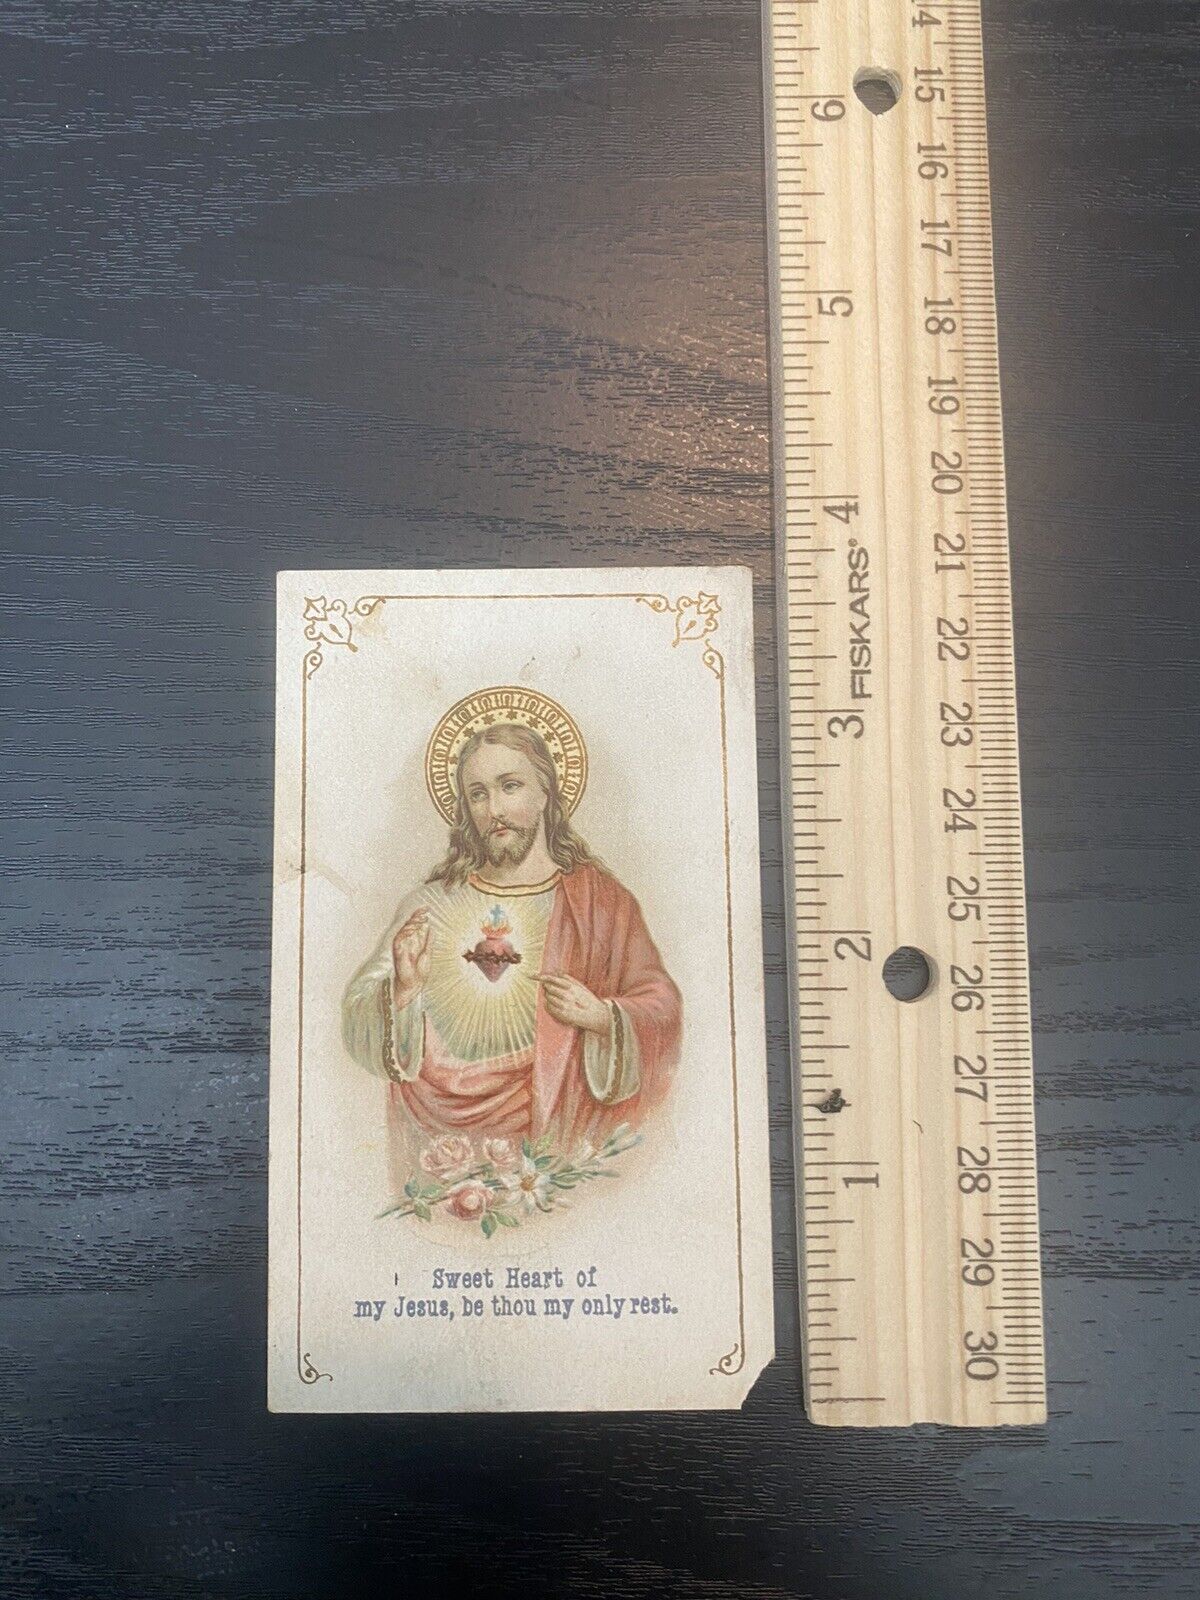 Antique Catholic Prayer Card Religious Collectible 1890's Holy Card. Heart